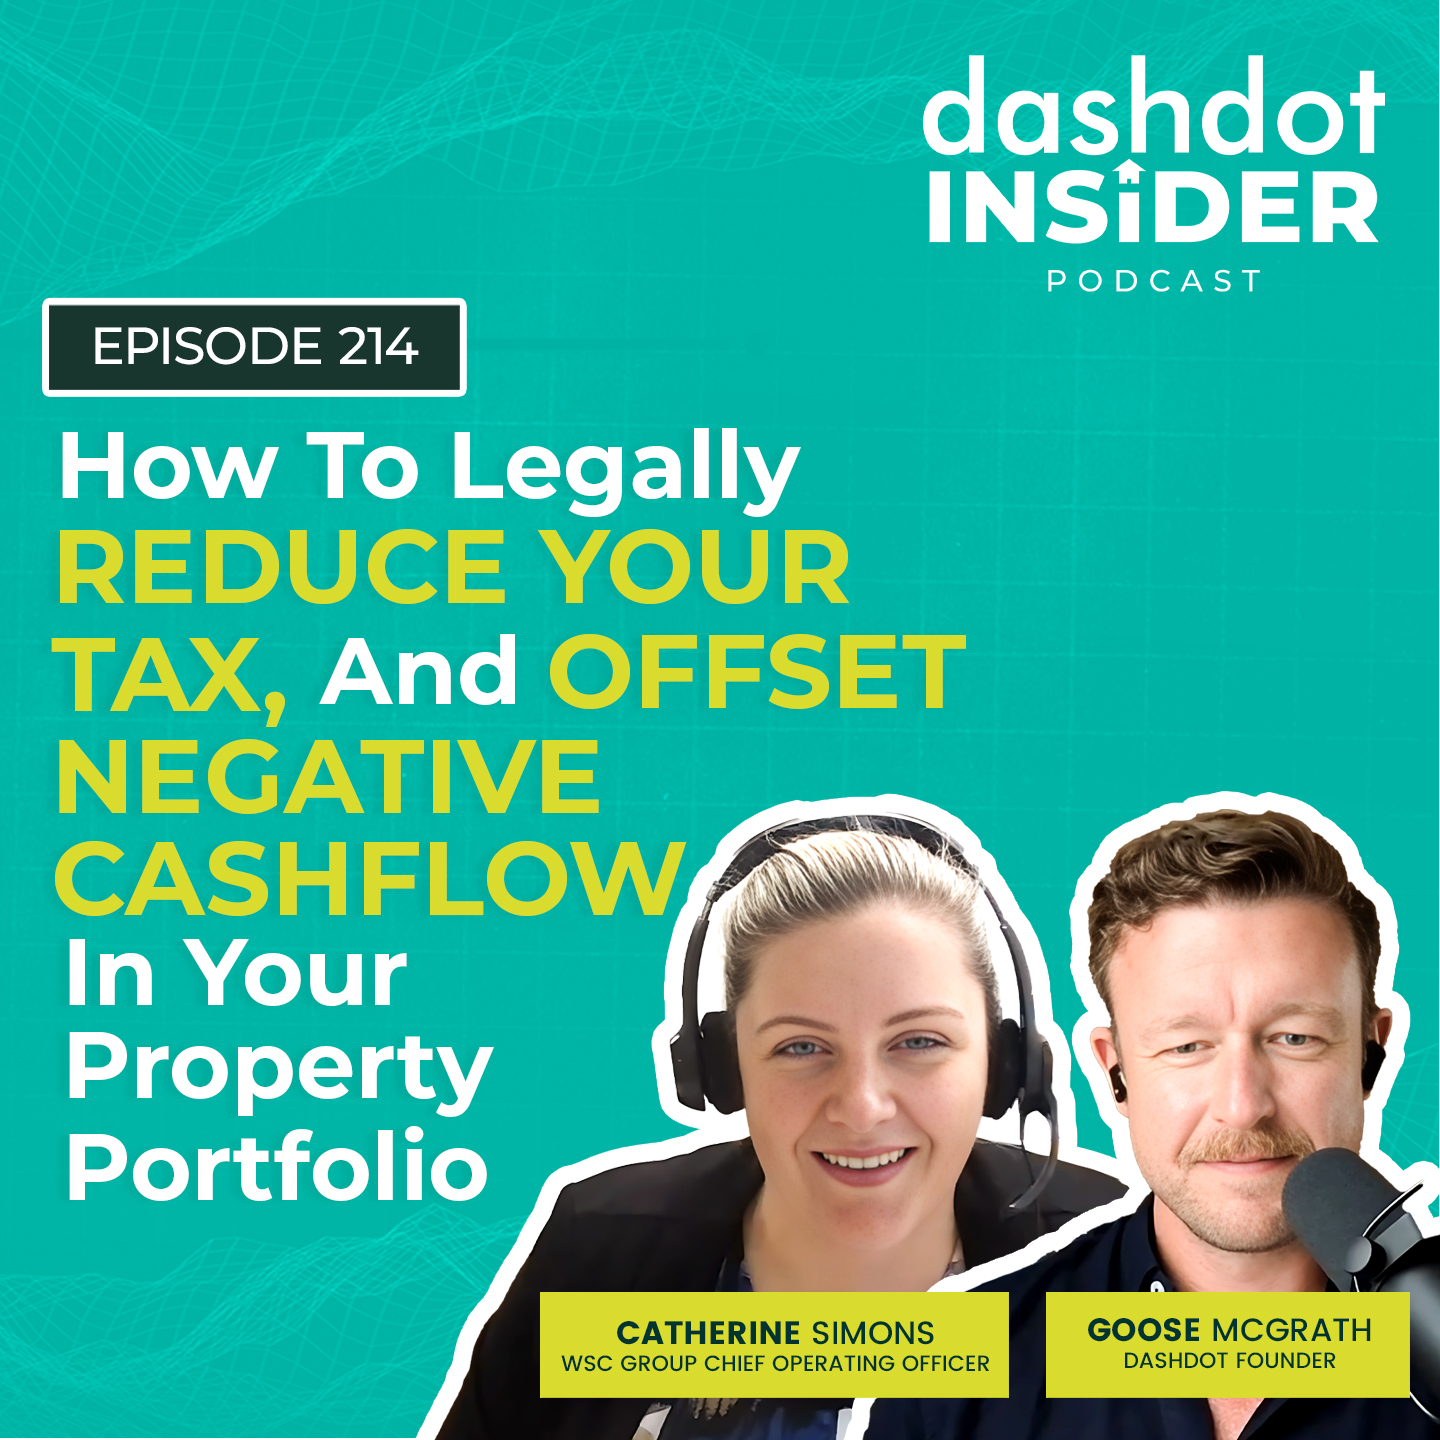 How To Legally Reduce Your Tax, and Offset Negative Cashflow In Your Property Portfolio w/ Catherine Simons | #214